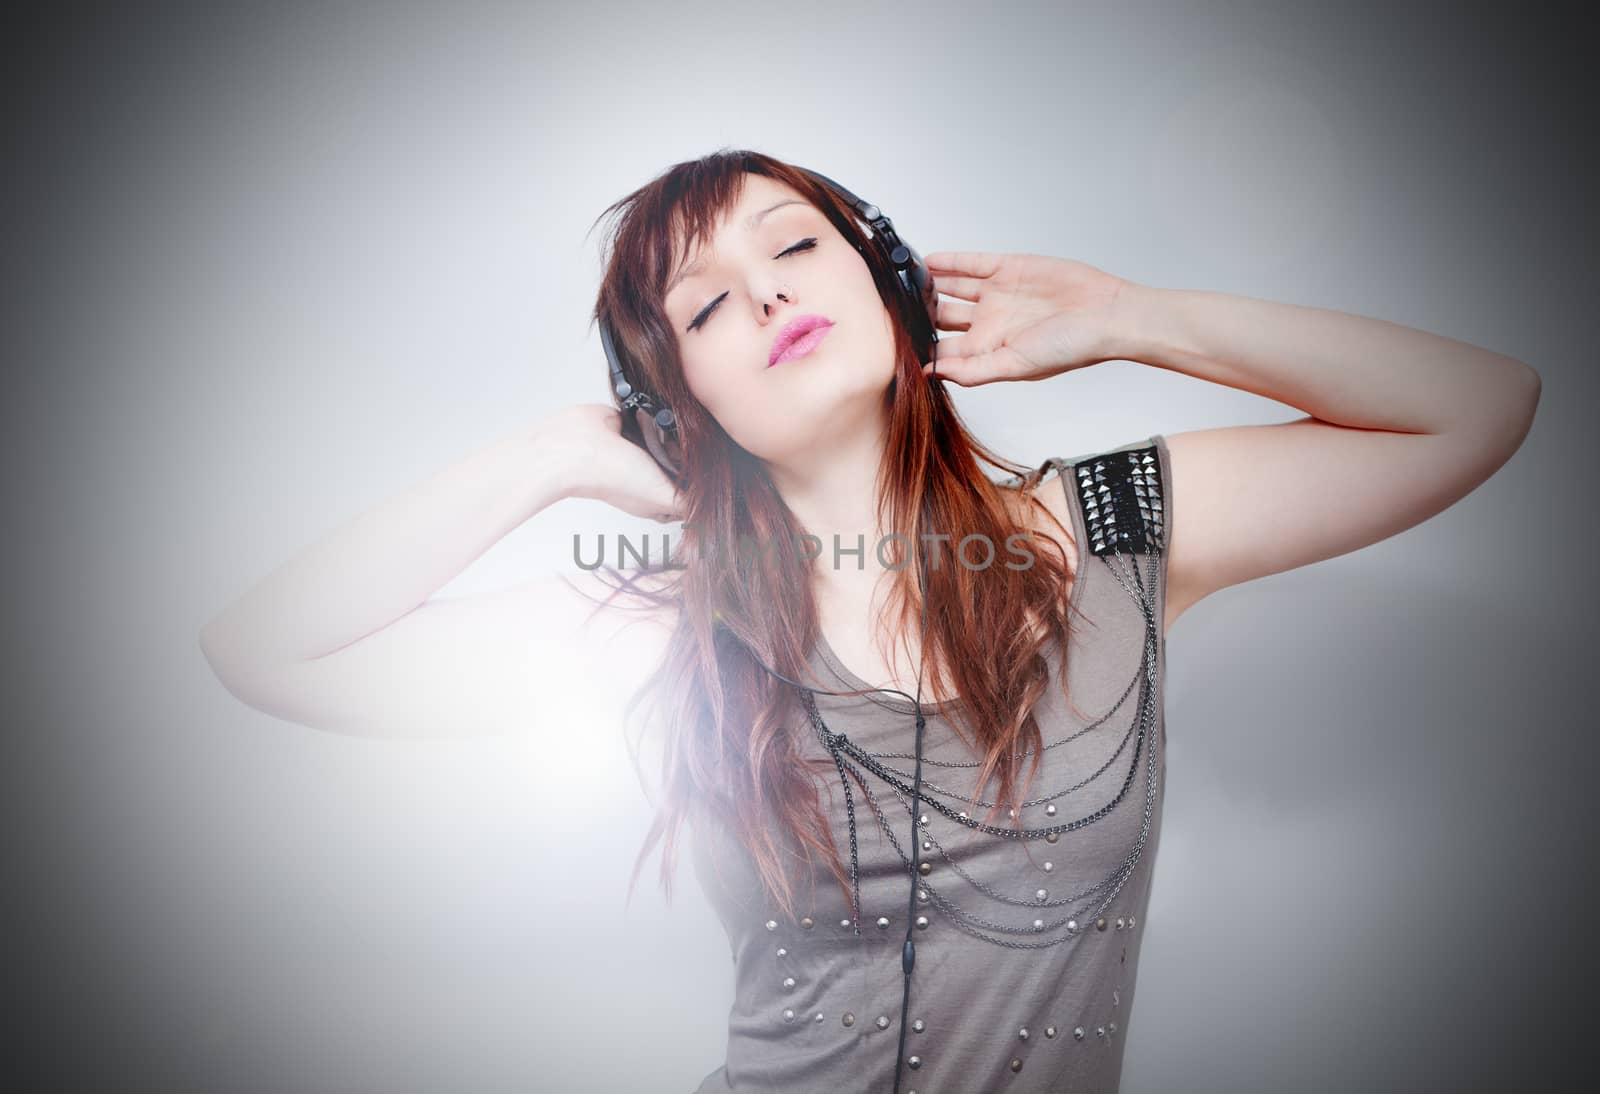 Beautiful young woman listening to music with headphones on background with stage lights. Music live